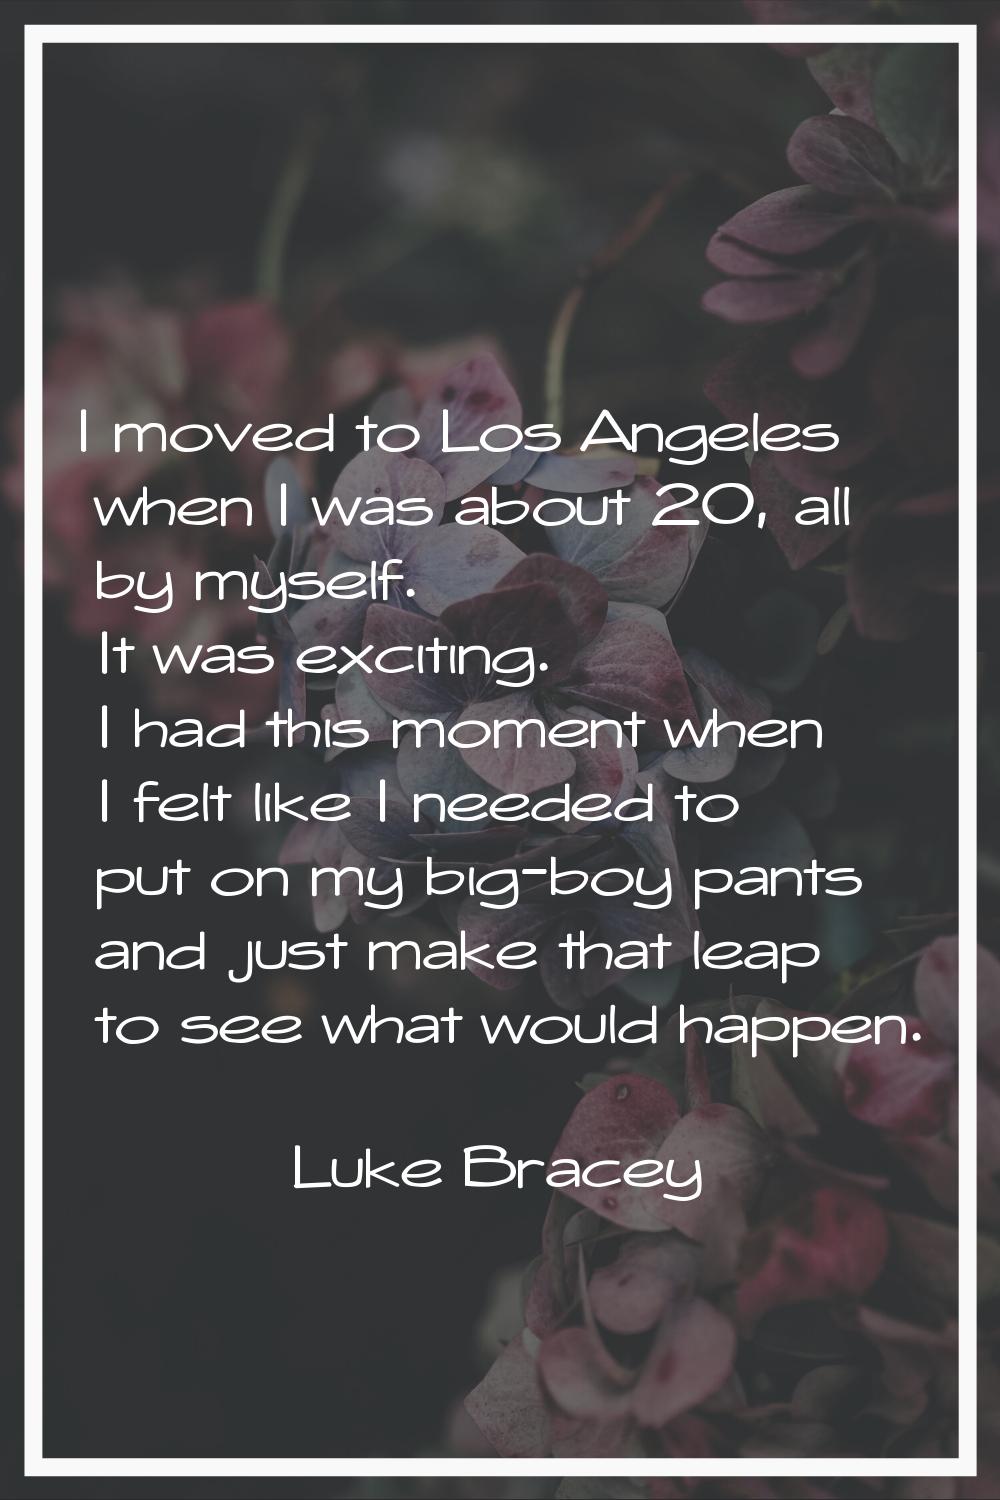 I moved to Los Angeles when I was about 20, all by myself. It was exciting. I had this moment when 